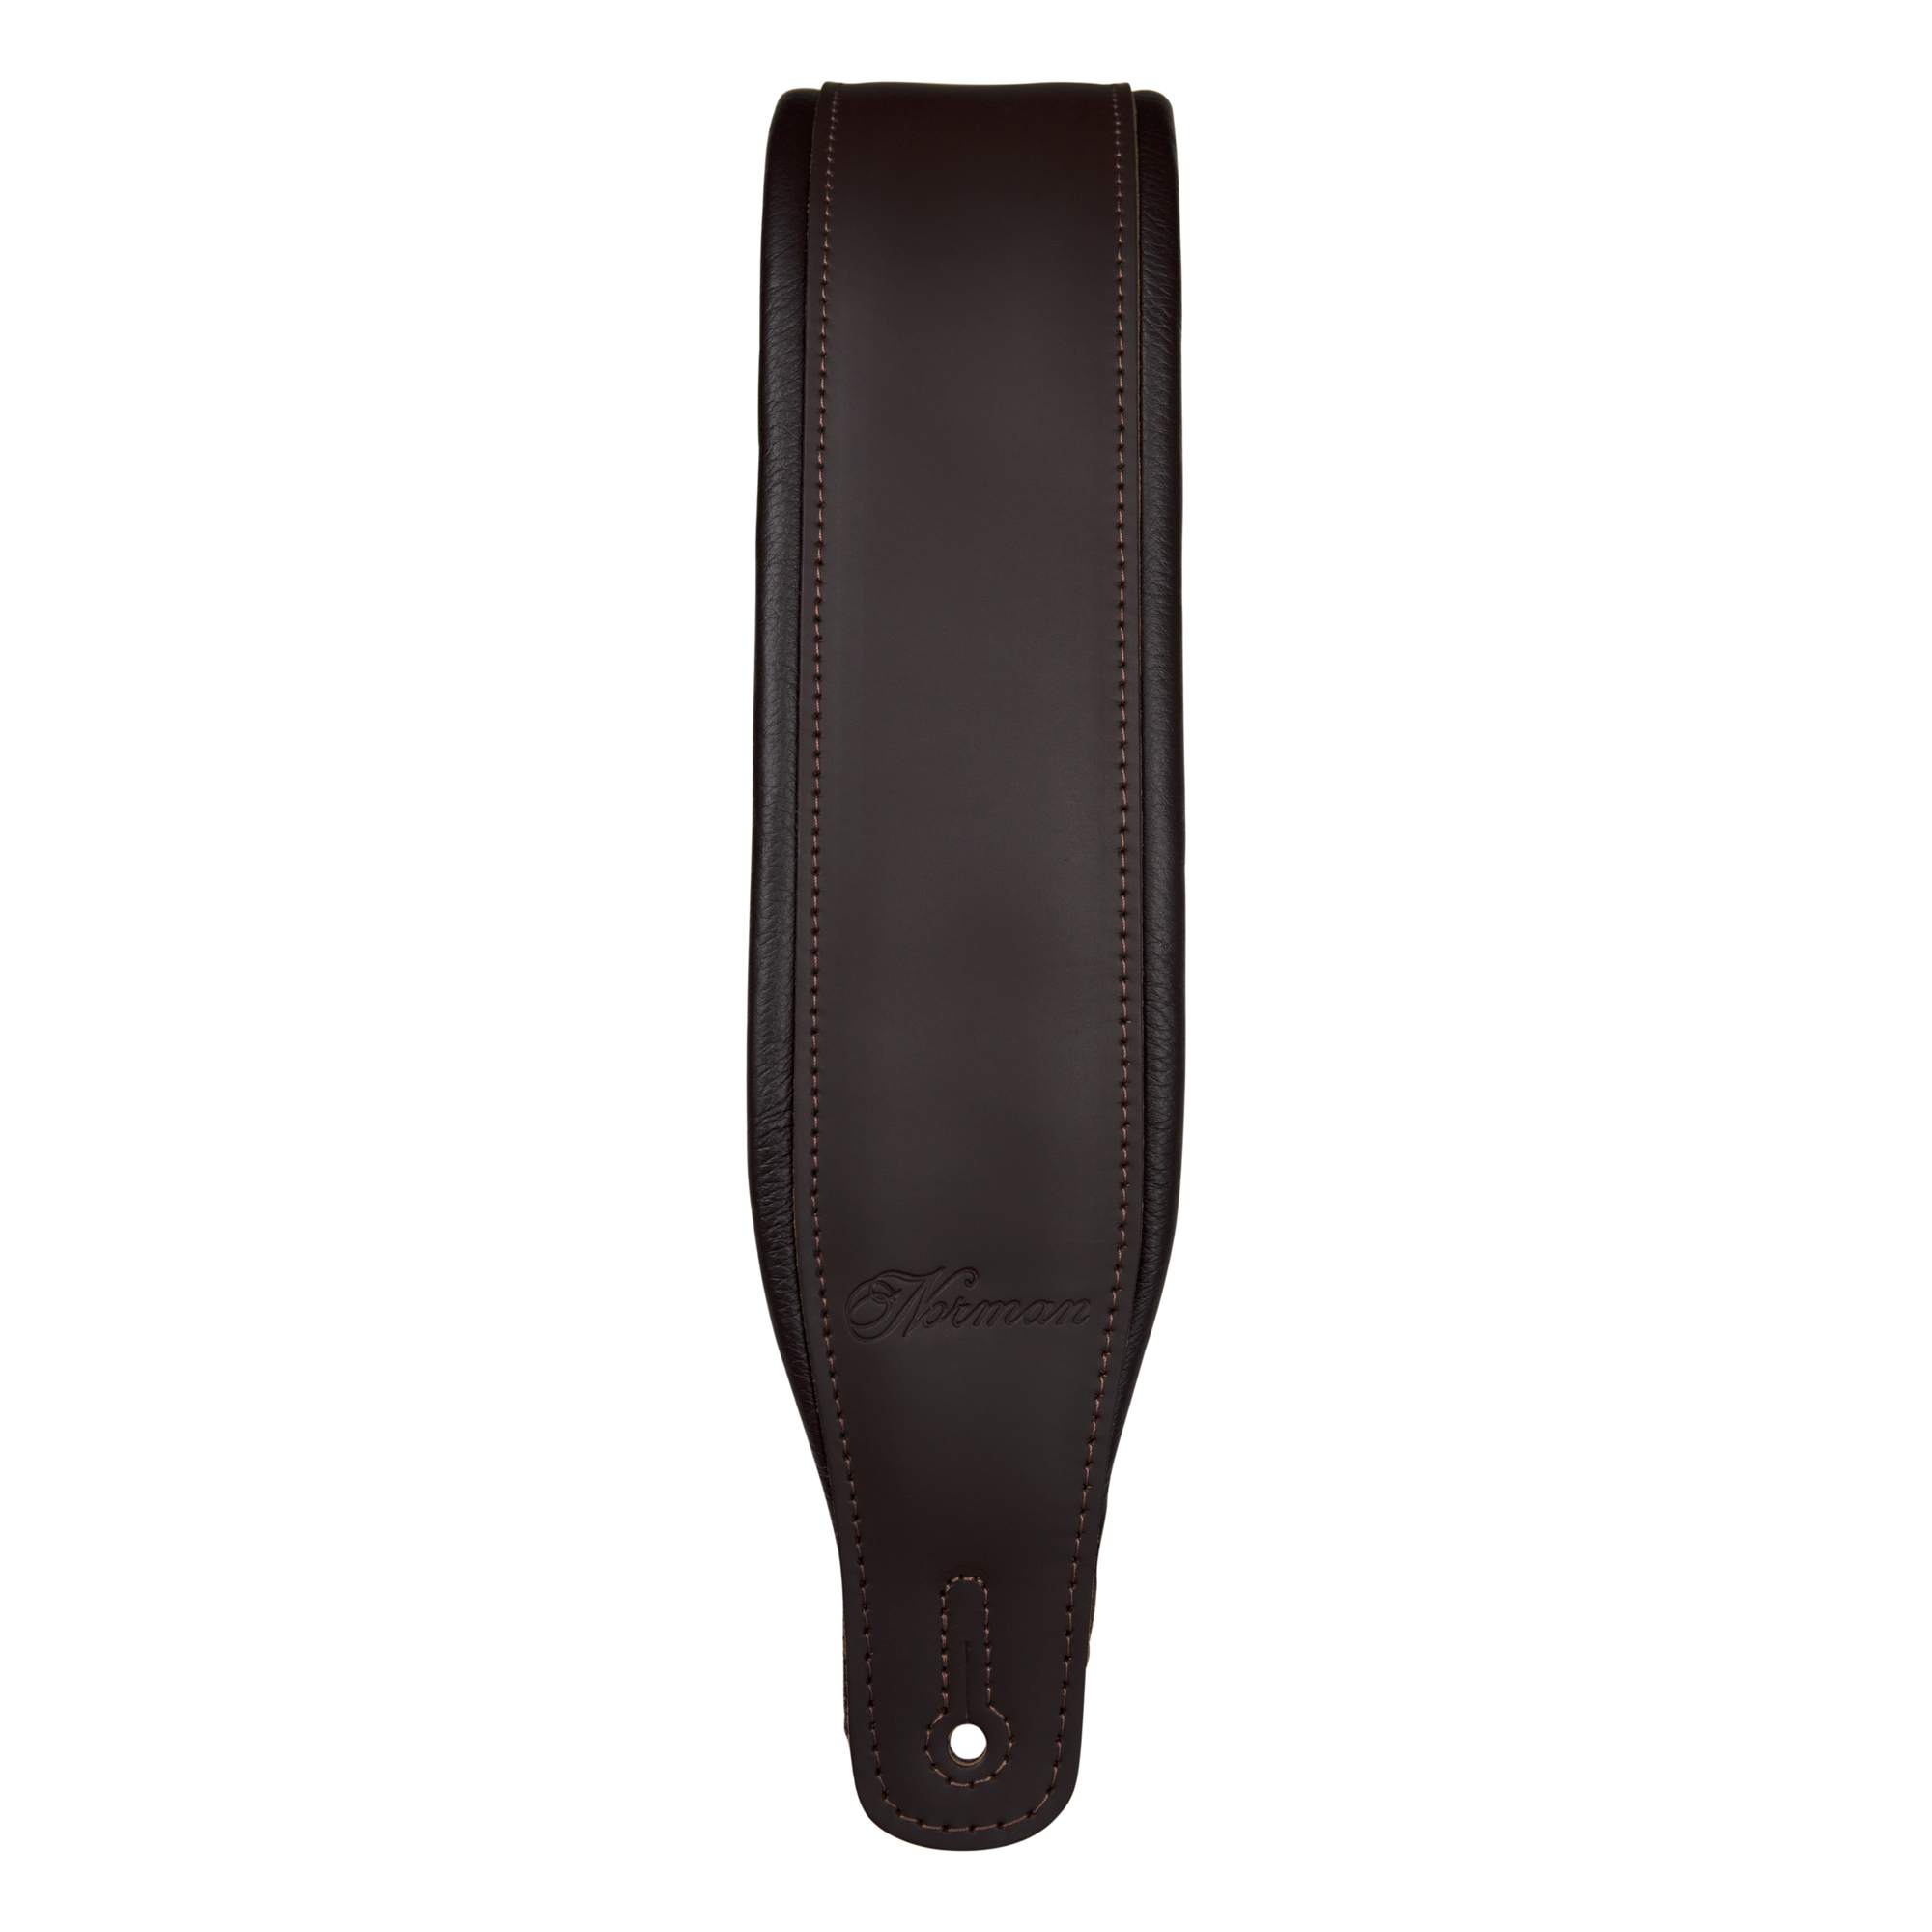 https://normanguitars.com/wp-content/uploads/2022/05/051380_Norman_Brown_Leather-Padded_Strap.jpg